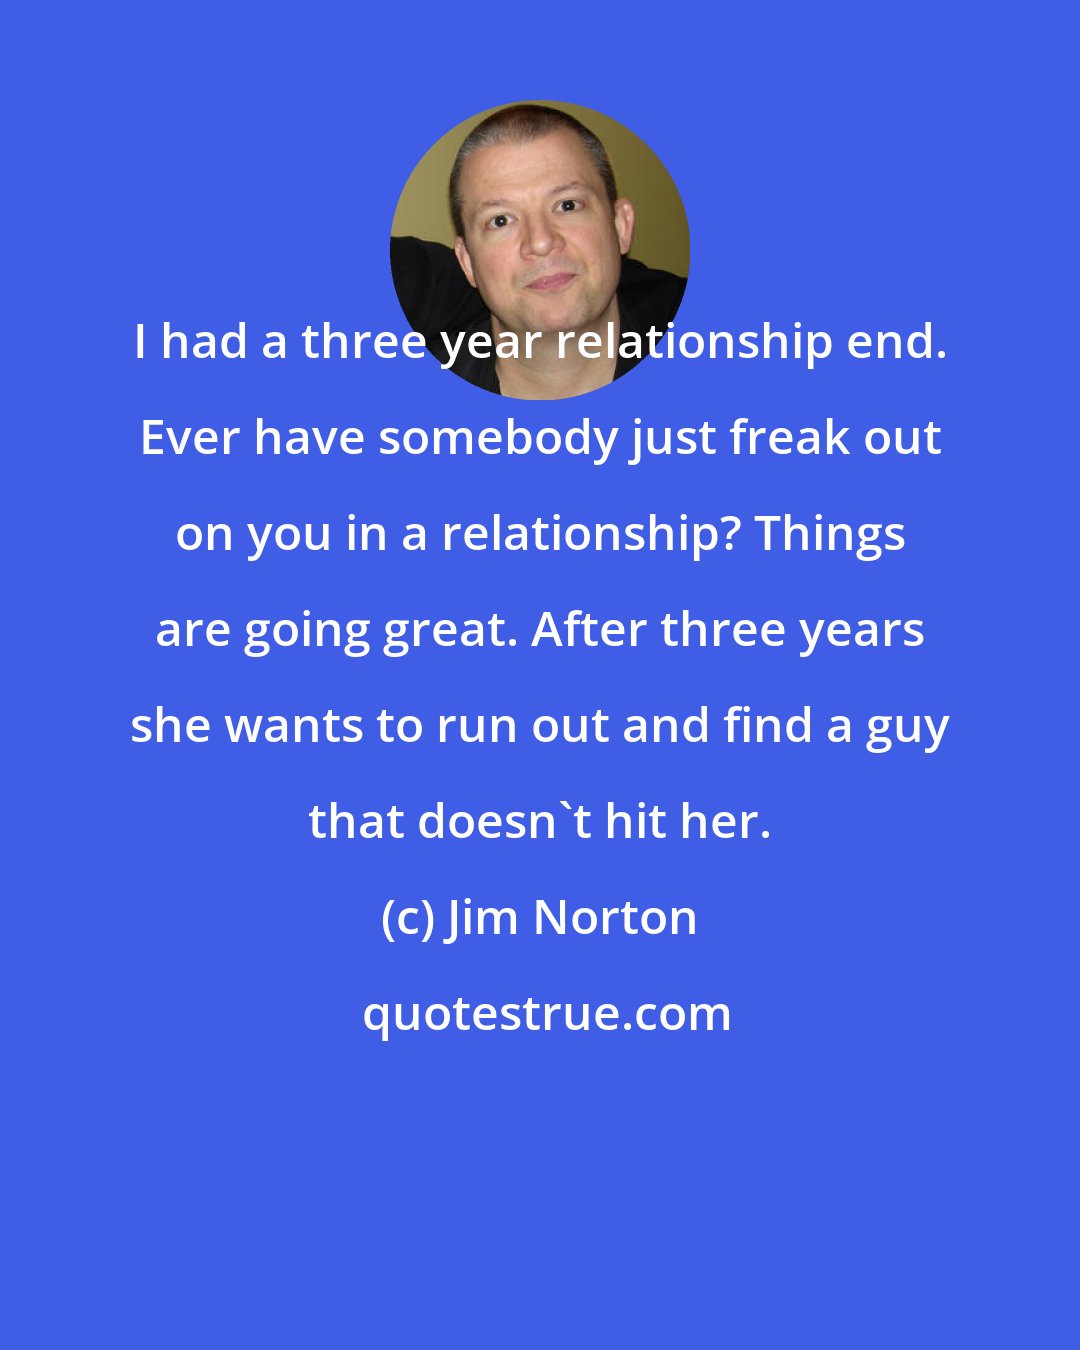 Jim Norton: I had a three year relationship end. Ever have somebody just freak out on you in a relationship? Things are going great. After three years she wants to run out and find a guy that doesn't hit her.